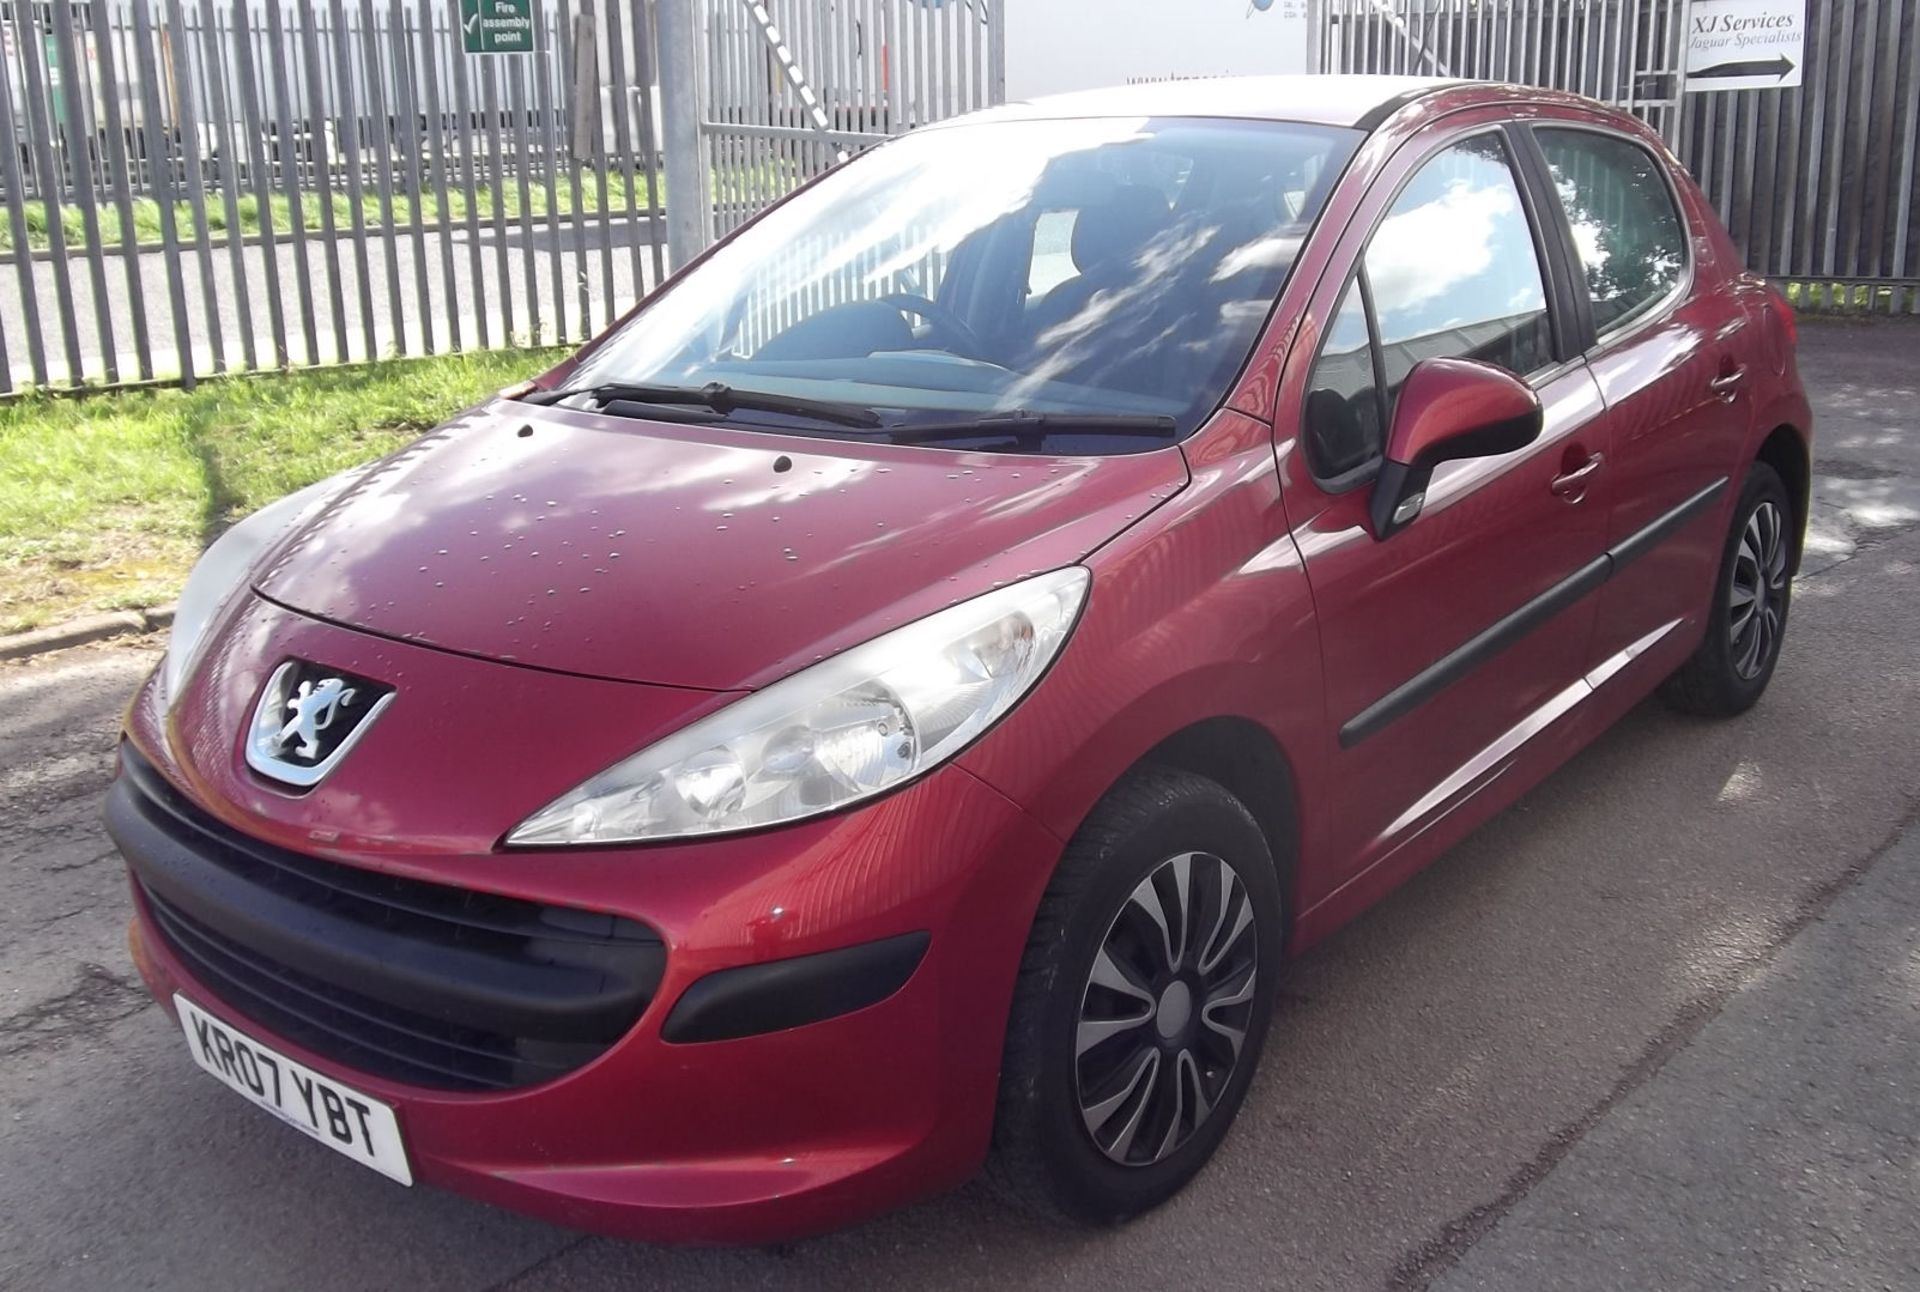 2007 Peugeot 207 1.6 HdiS 5 Door Hatchback - CL505 - NO VAT ON THE HAMMER - Location: Corby - Image 7 of 9